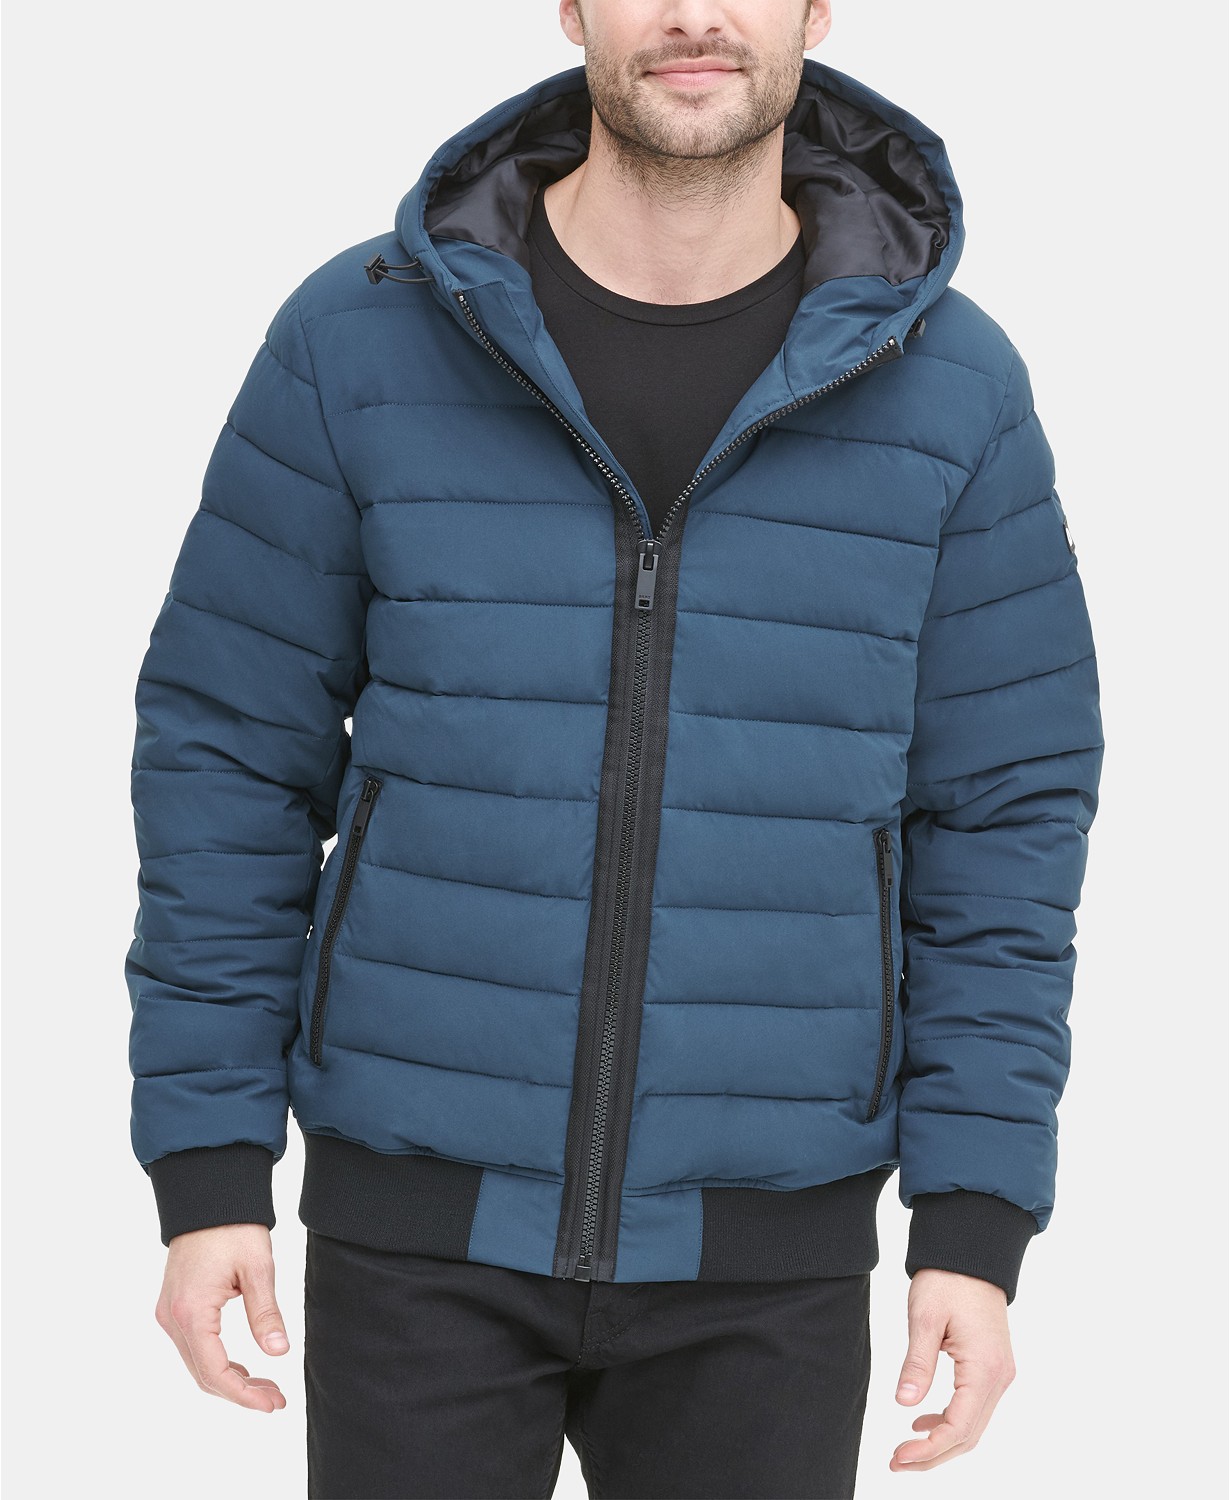 DKNY Mens Quilted Hooded Bomber Jacket